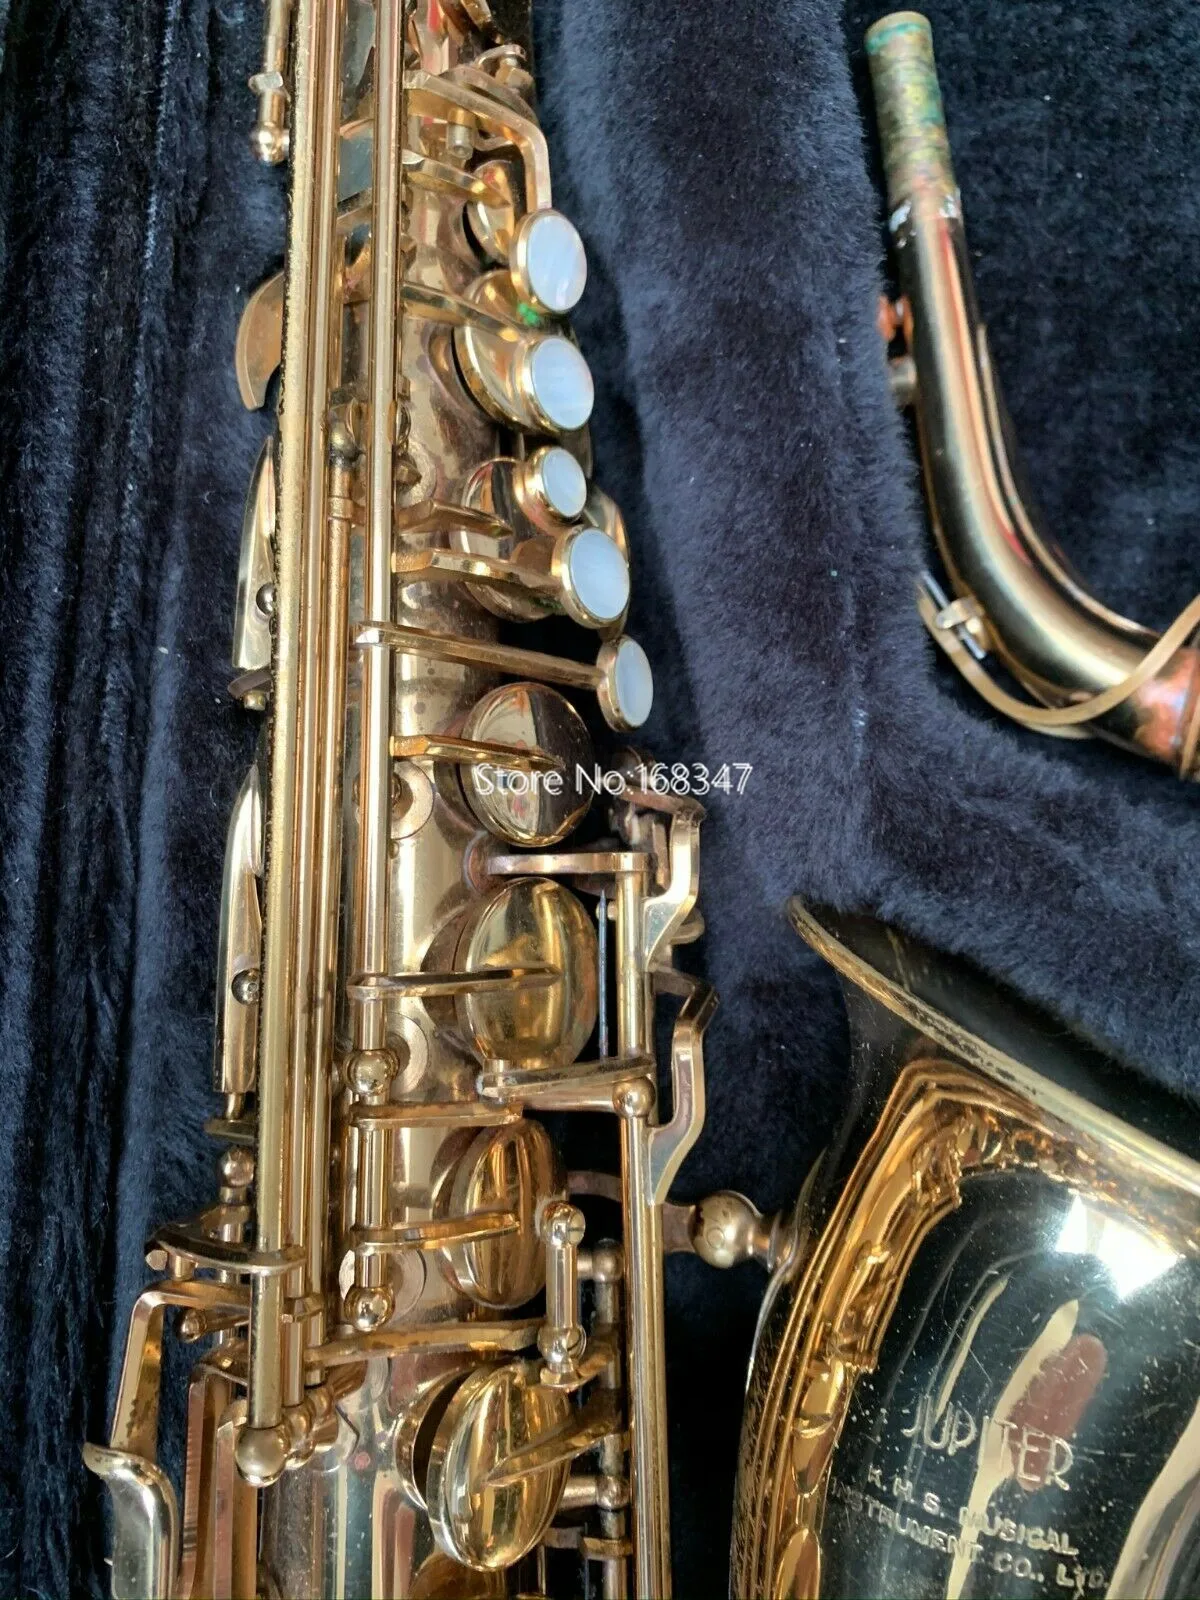 Hot Selling Jupiter SAS 767 Alto Saxophone Eb Tune E Flat Brass Gold  Musical instruments professional with Case Free Shipping